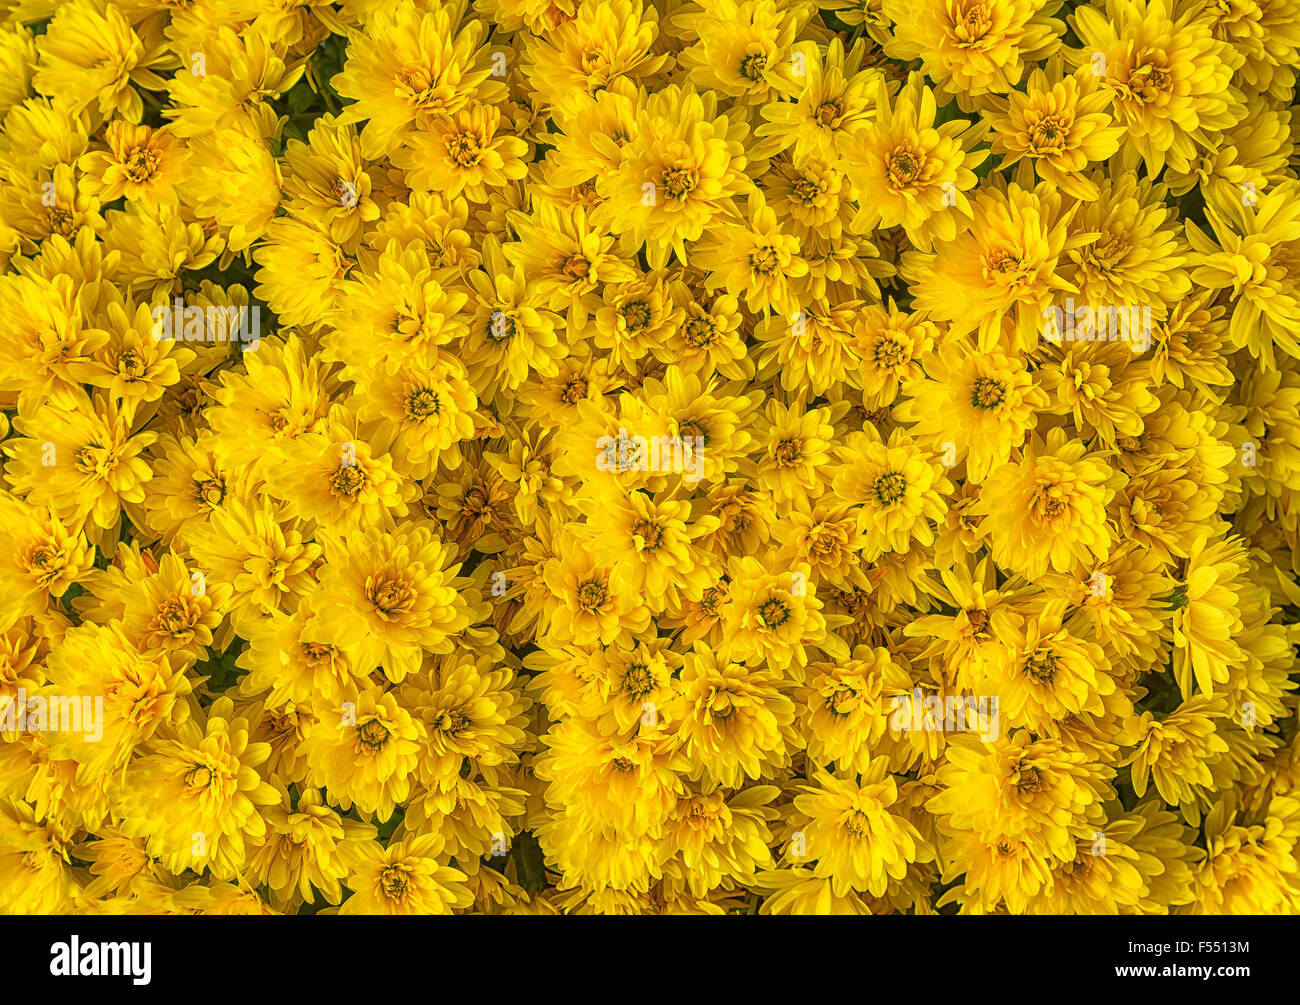 Yellow Mums or Chrysanthemums flower background Stock Photo